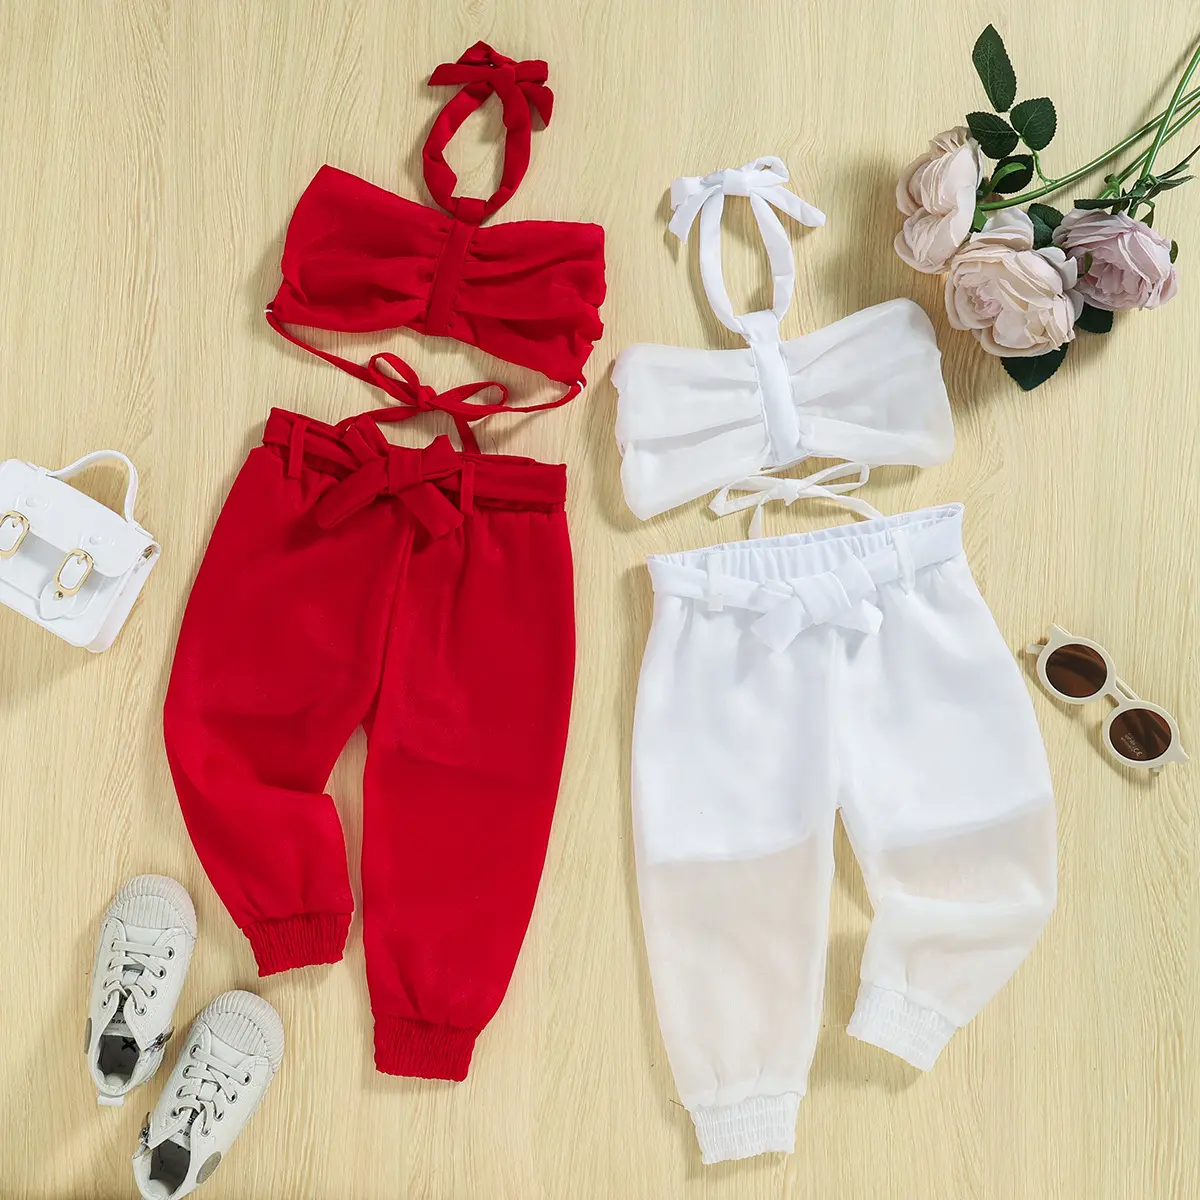 2022 New European and American style girls casual solid color sling summer suit baby children personalized fashion clothes